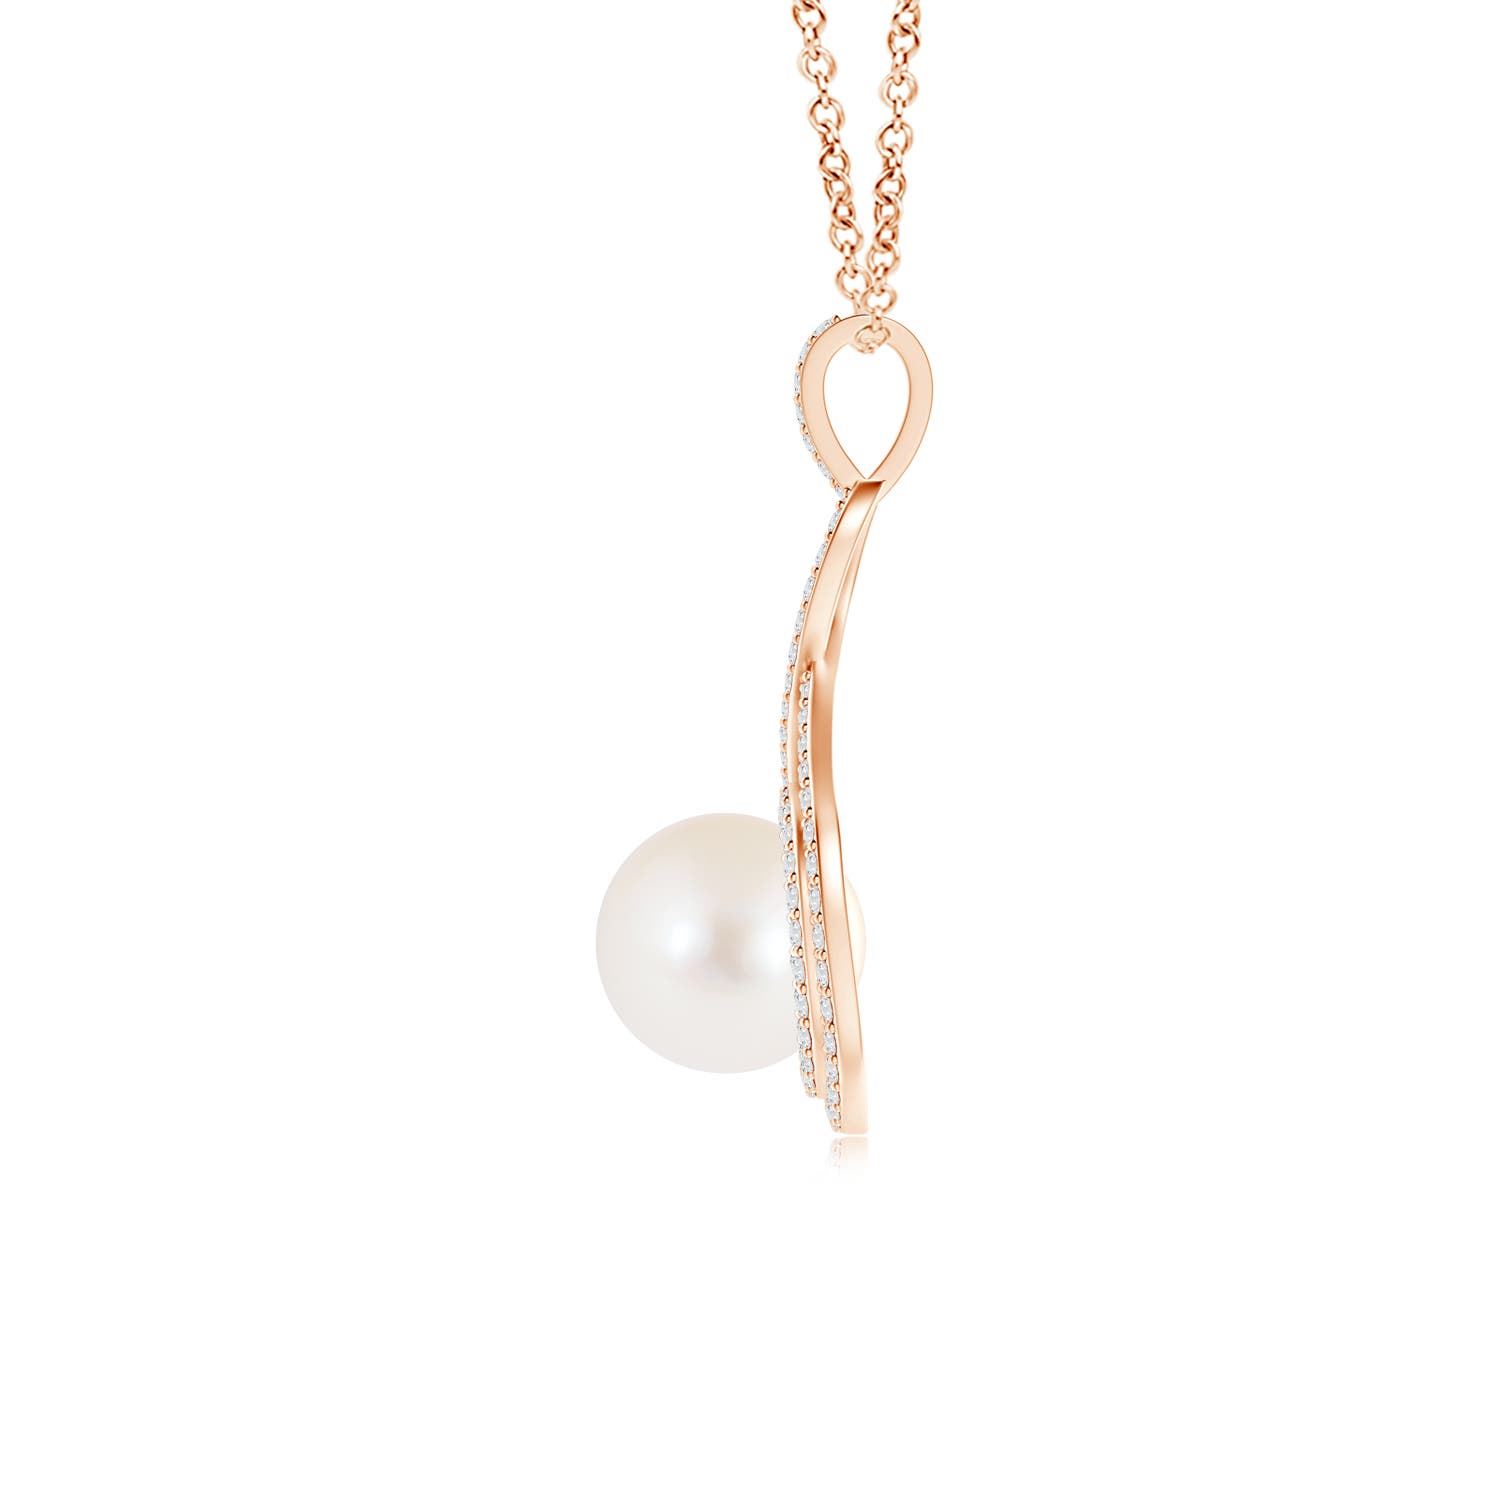 AAA - Freshwater Cultured Pearl / 4.08 CT / 14 KT Rose Gold